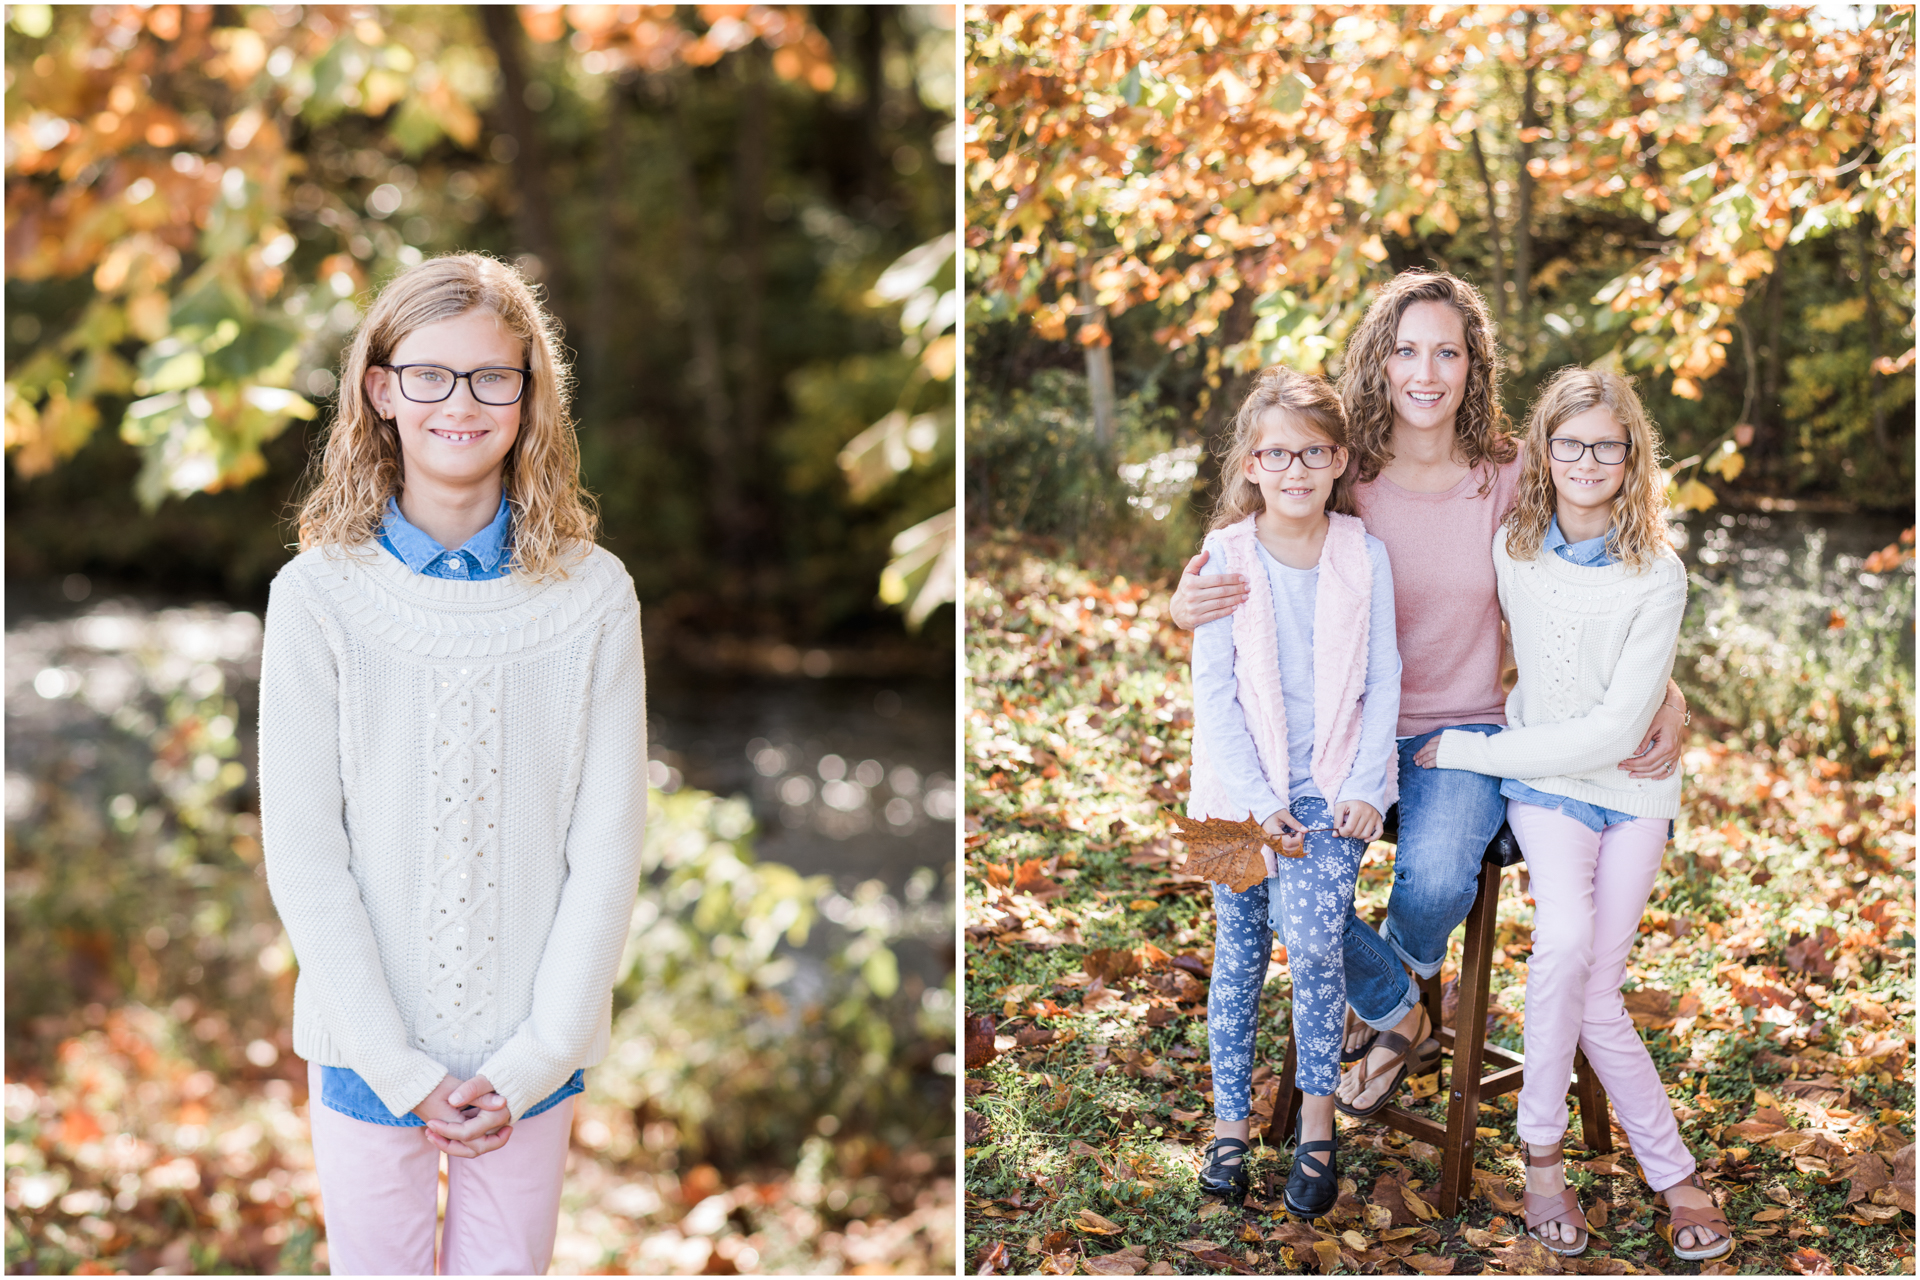 Swan Creek Photo Session - Mommy and Me - Mother with daughters - Autumn Leaves